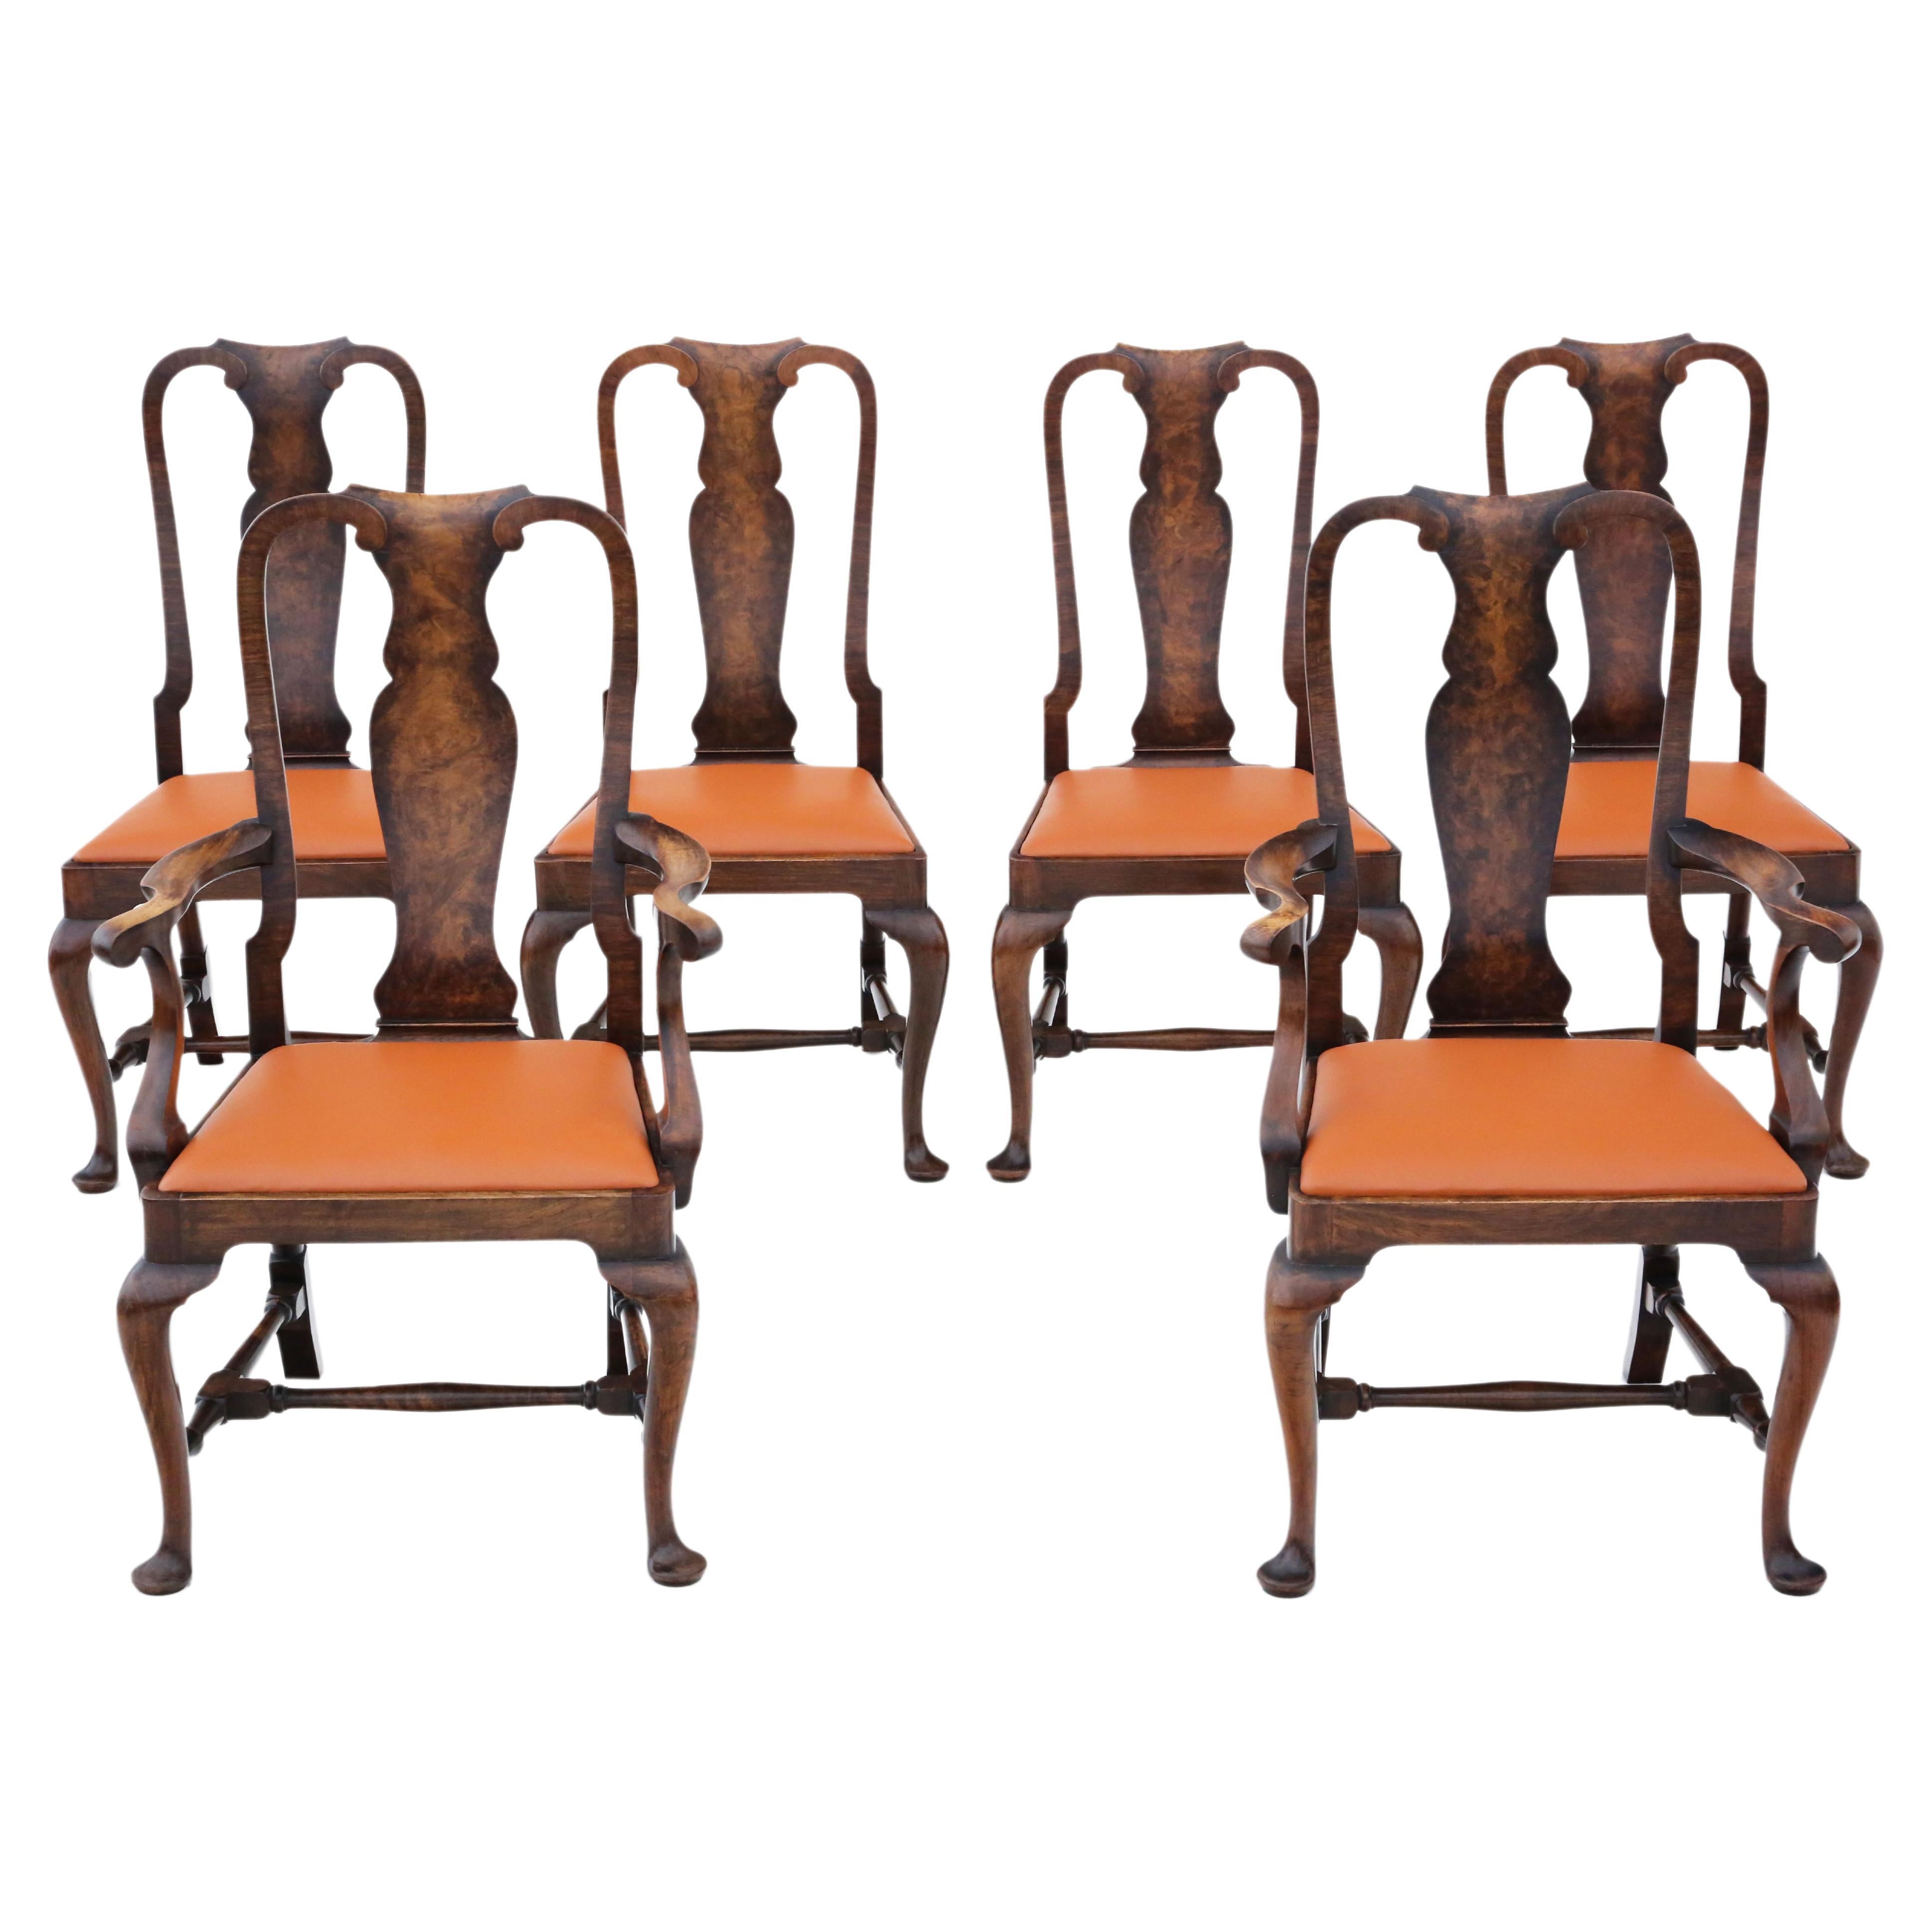 Antique Set of 6 Queen Anne Revival Burr Walnut Dining Chairs from circa 1910 - 